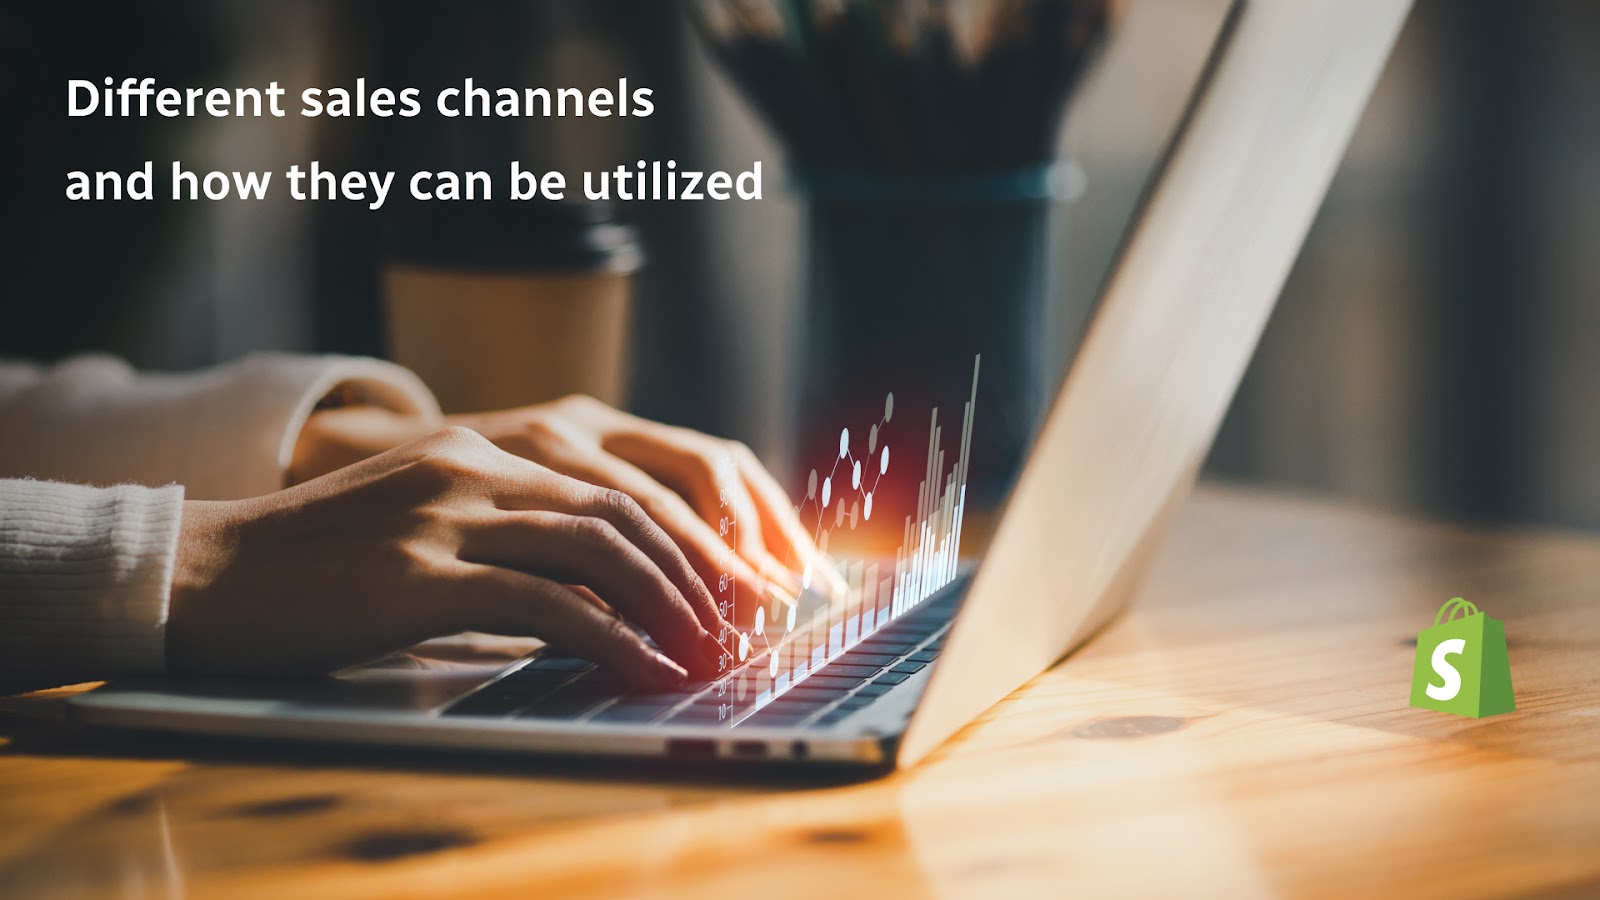 Different sales channels and how they can be utilized